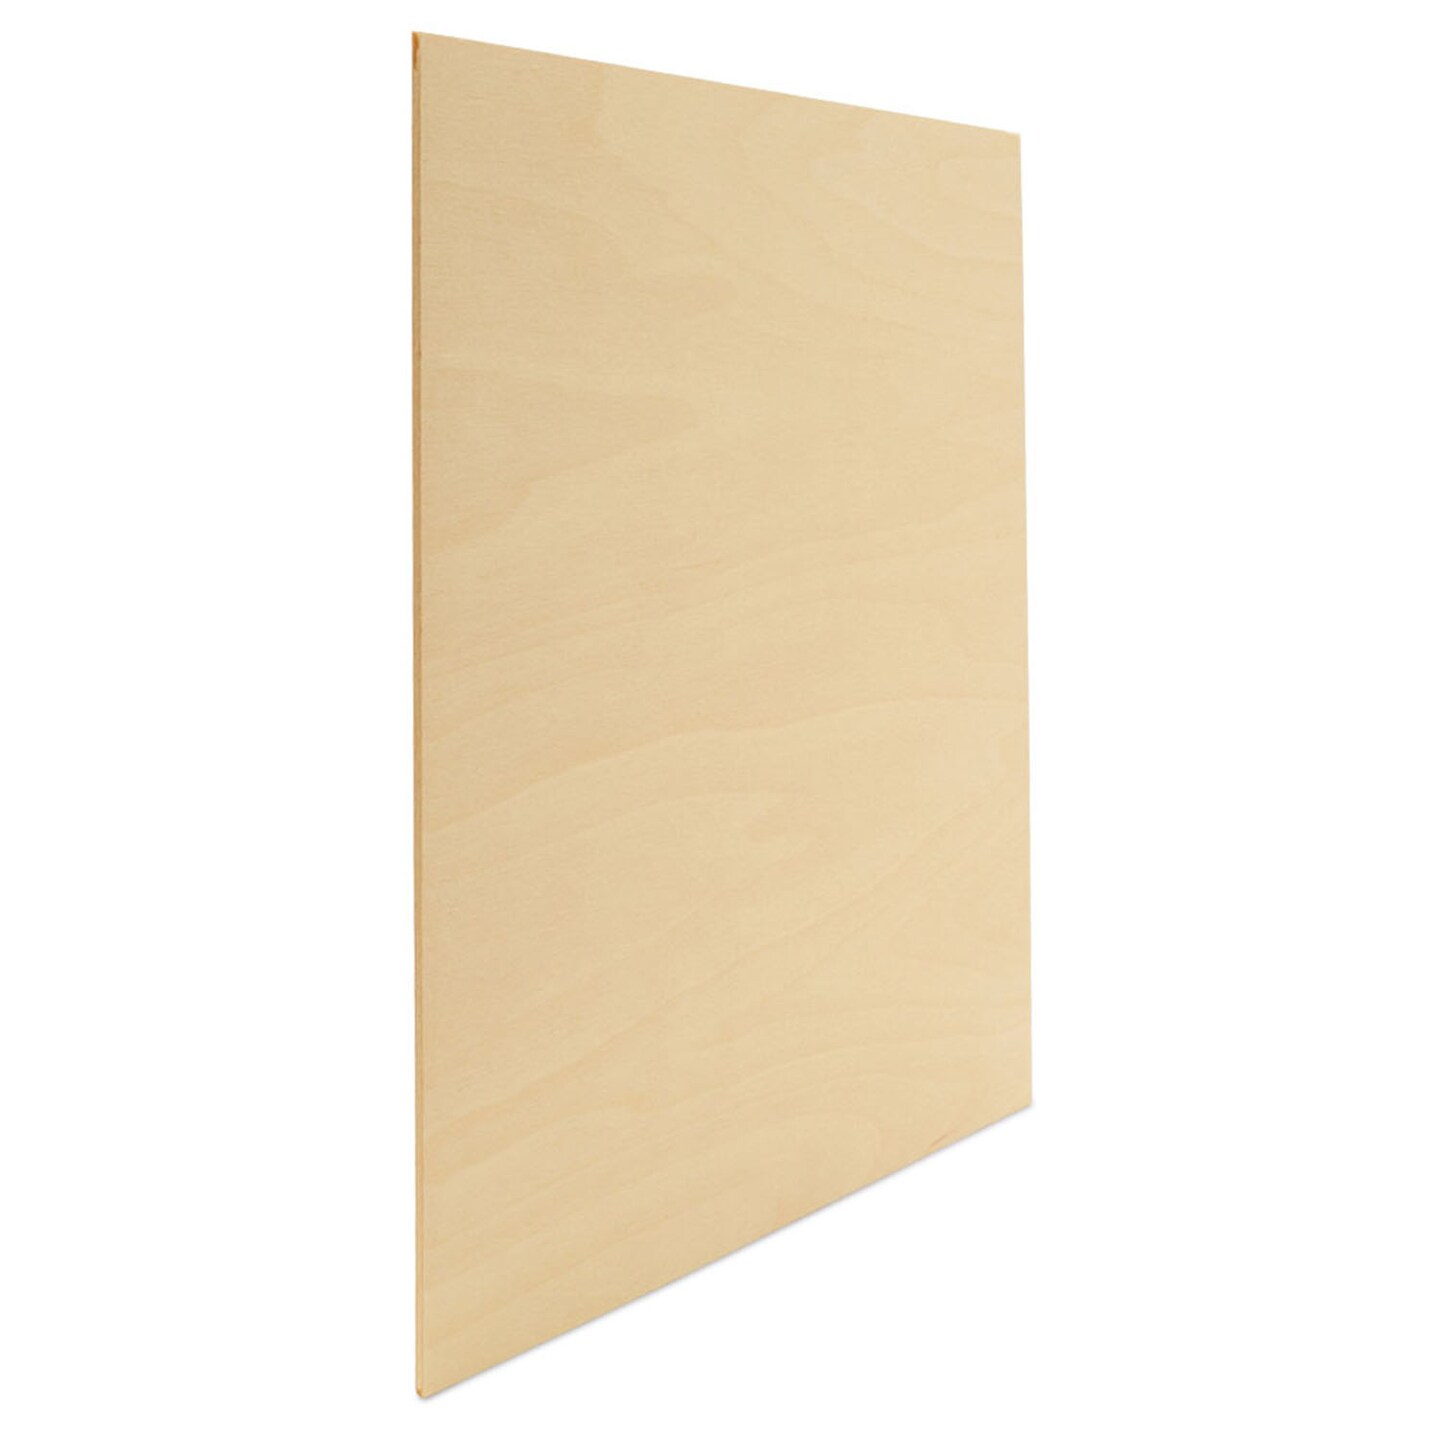 Baltic Birch Plywood, 12 x 8 Inch, B/BB Grade Sheets, 1/4 or 1/8 Inch Thick, Woodpeckers